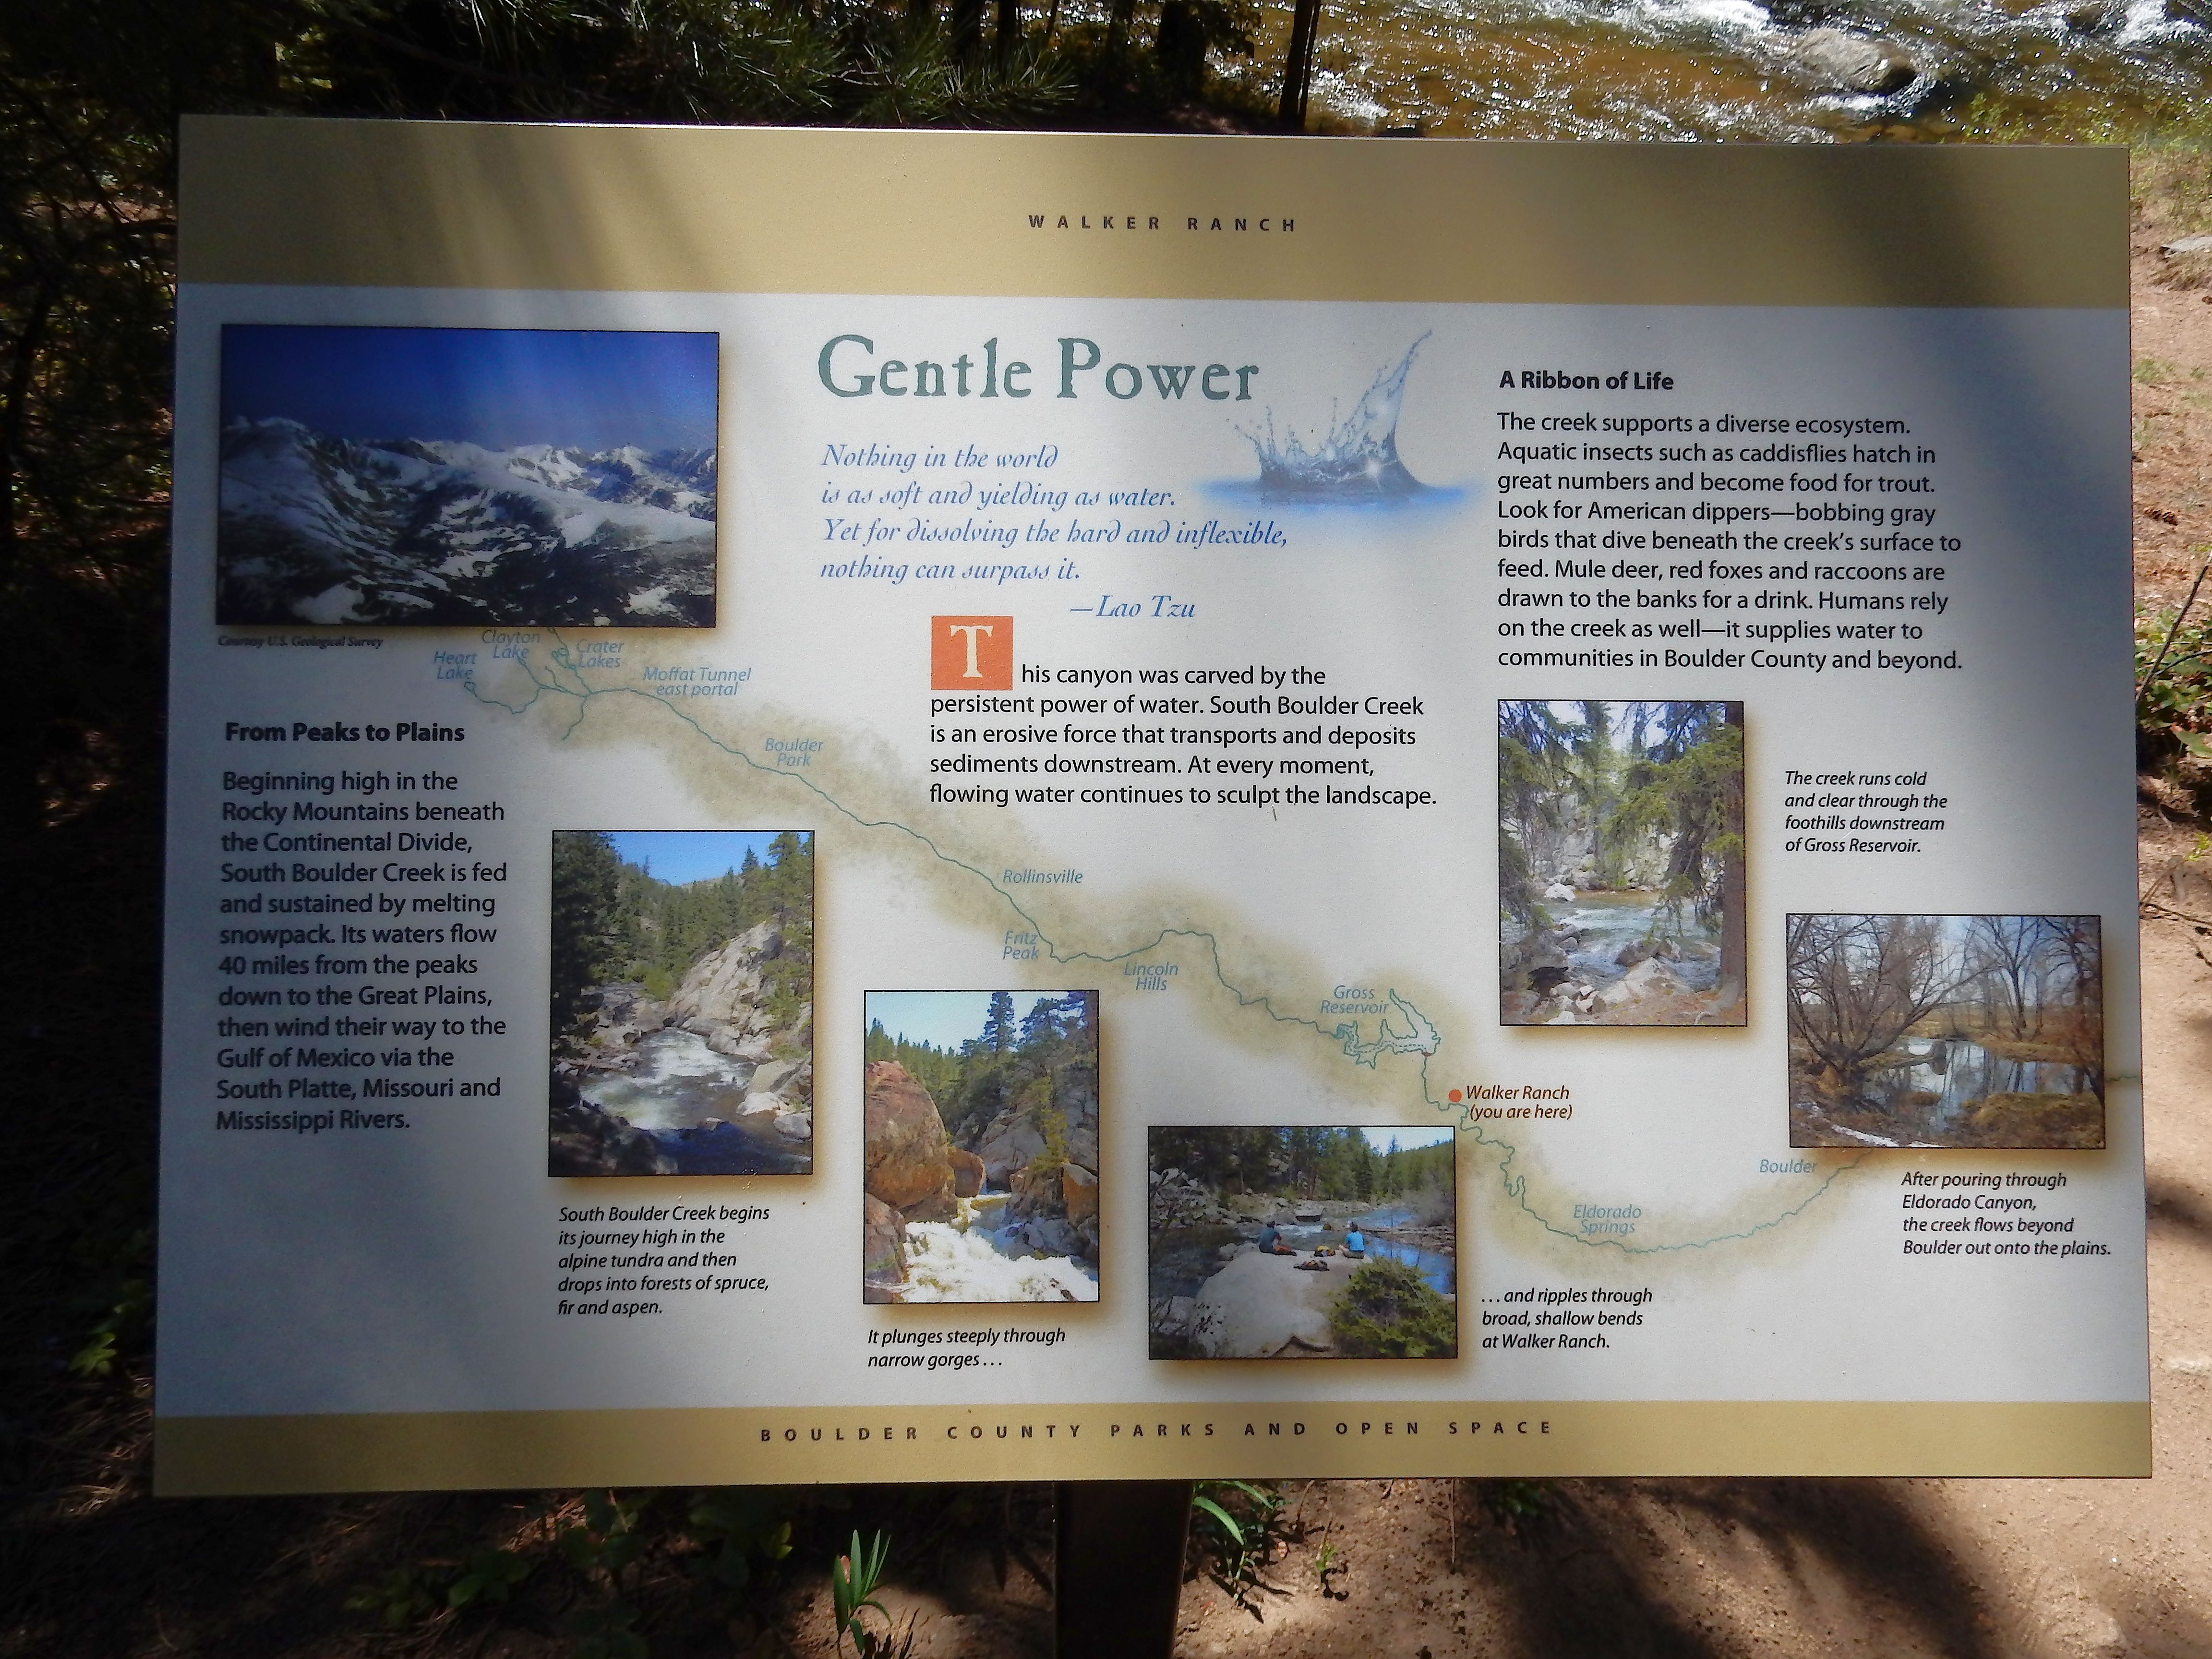 Some information on the creek and Gentle Power